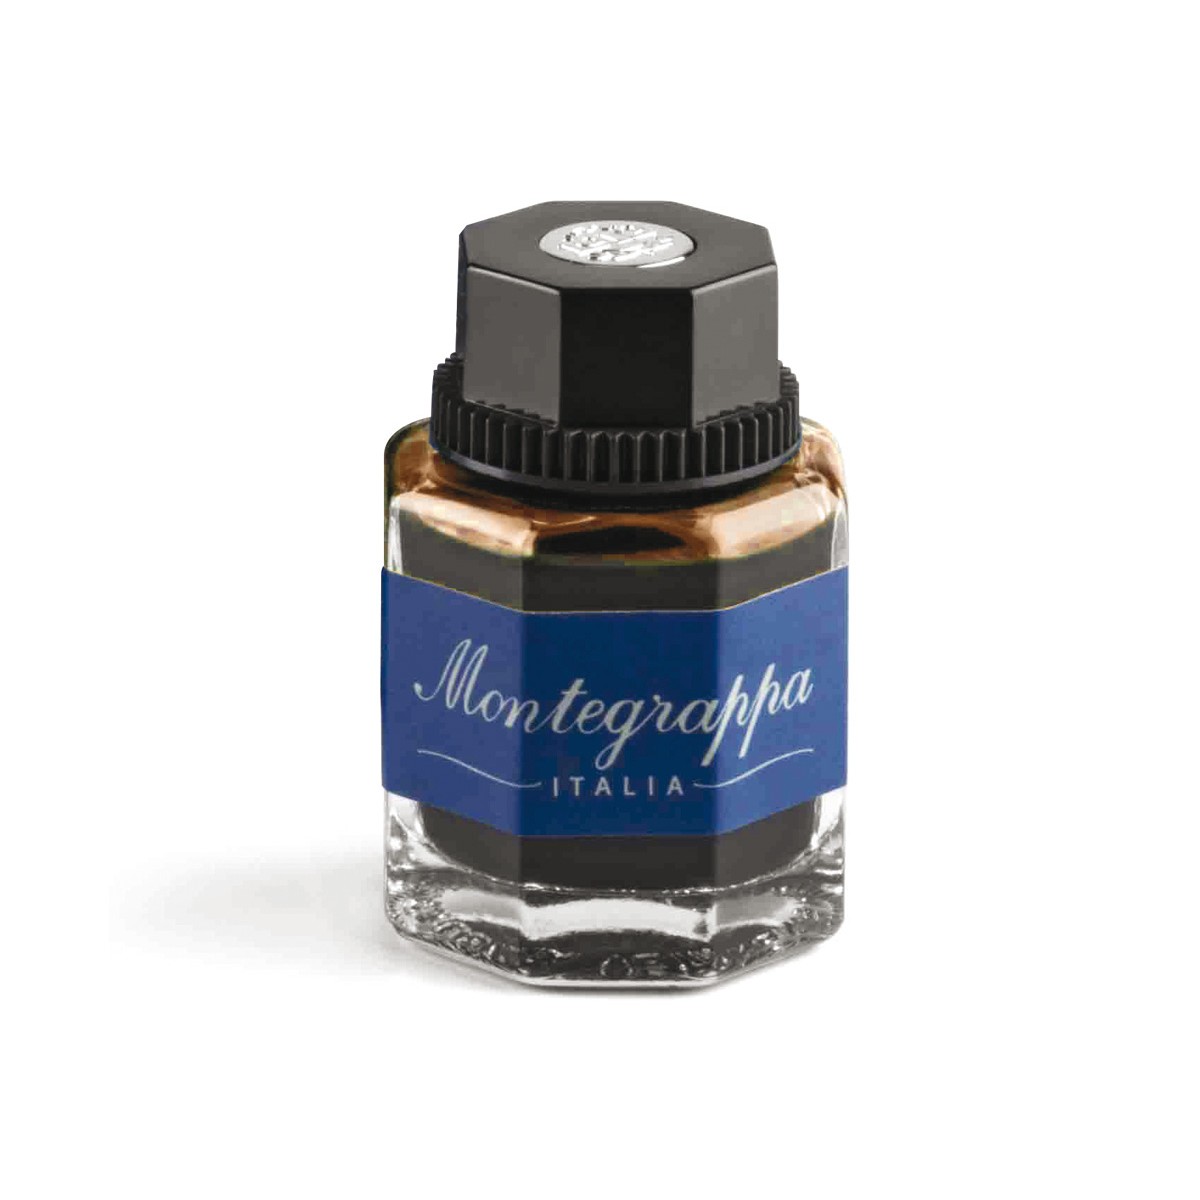 Motegrappa - Ink bottle - Brown